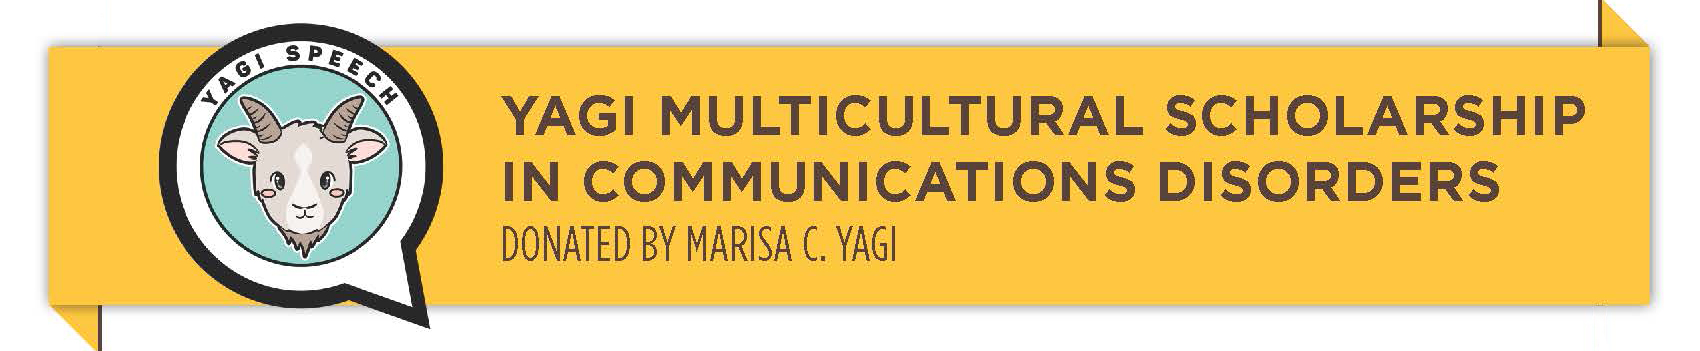 Image showing information on the Yagi Multicultural Scholarship